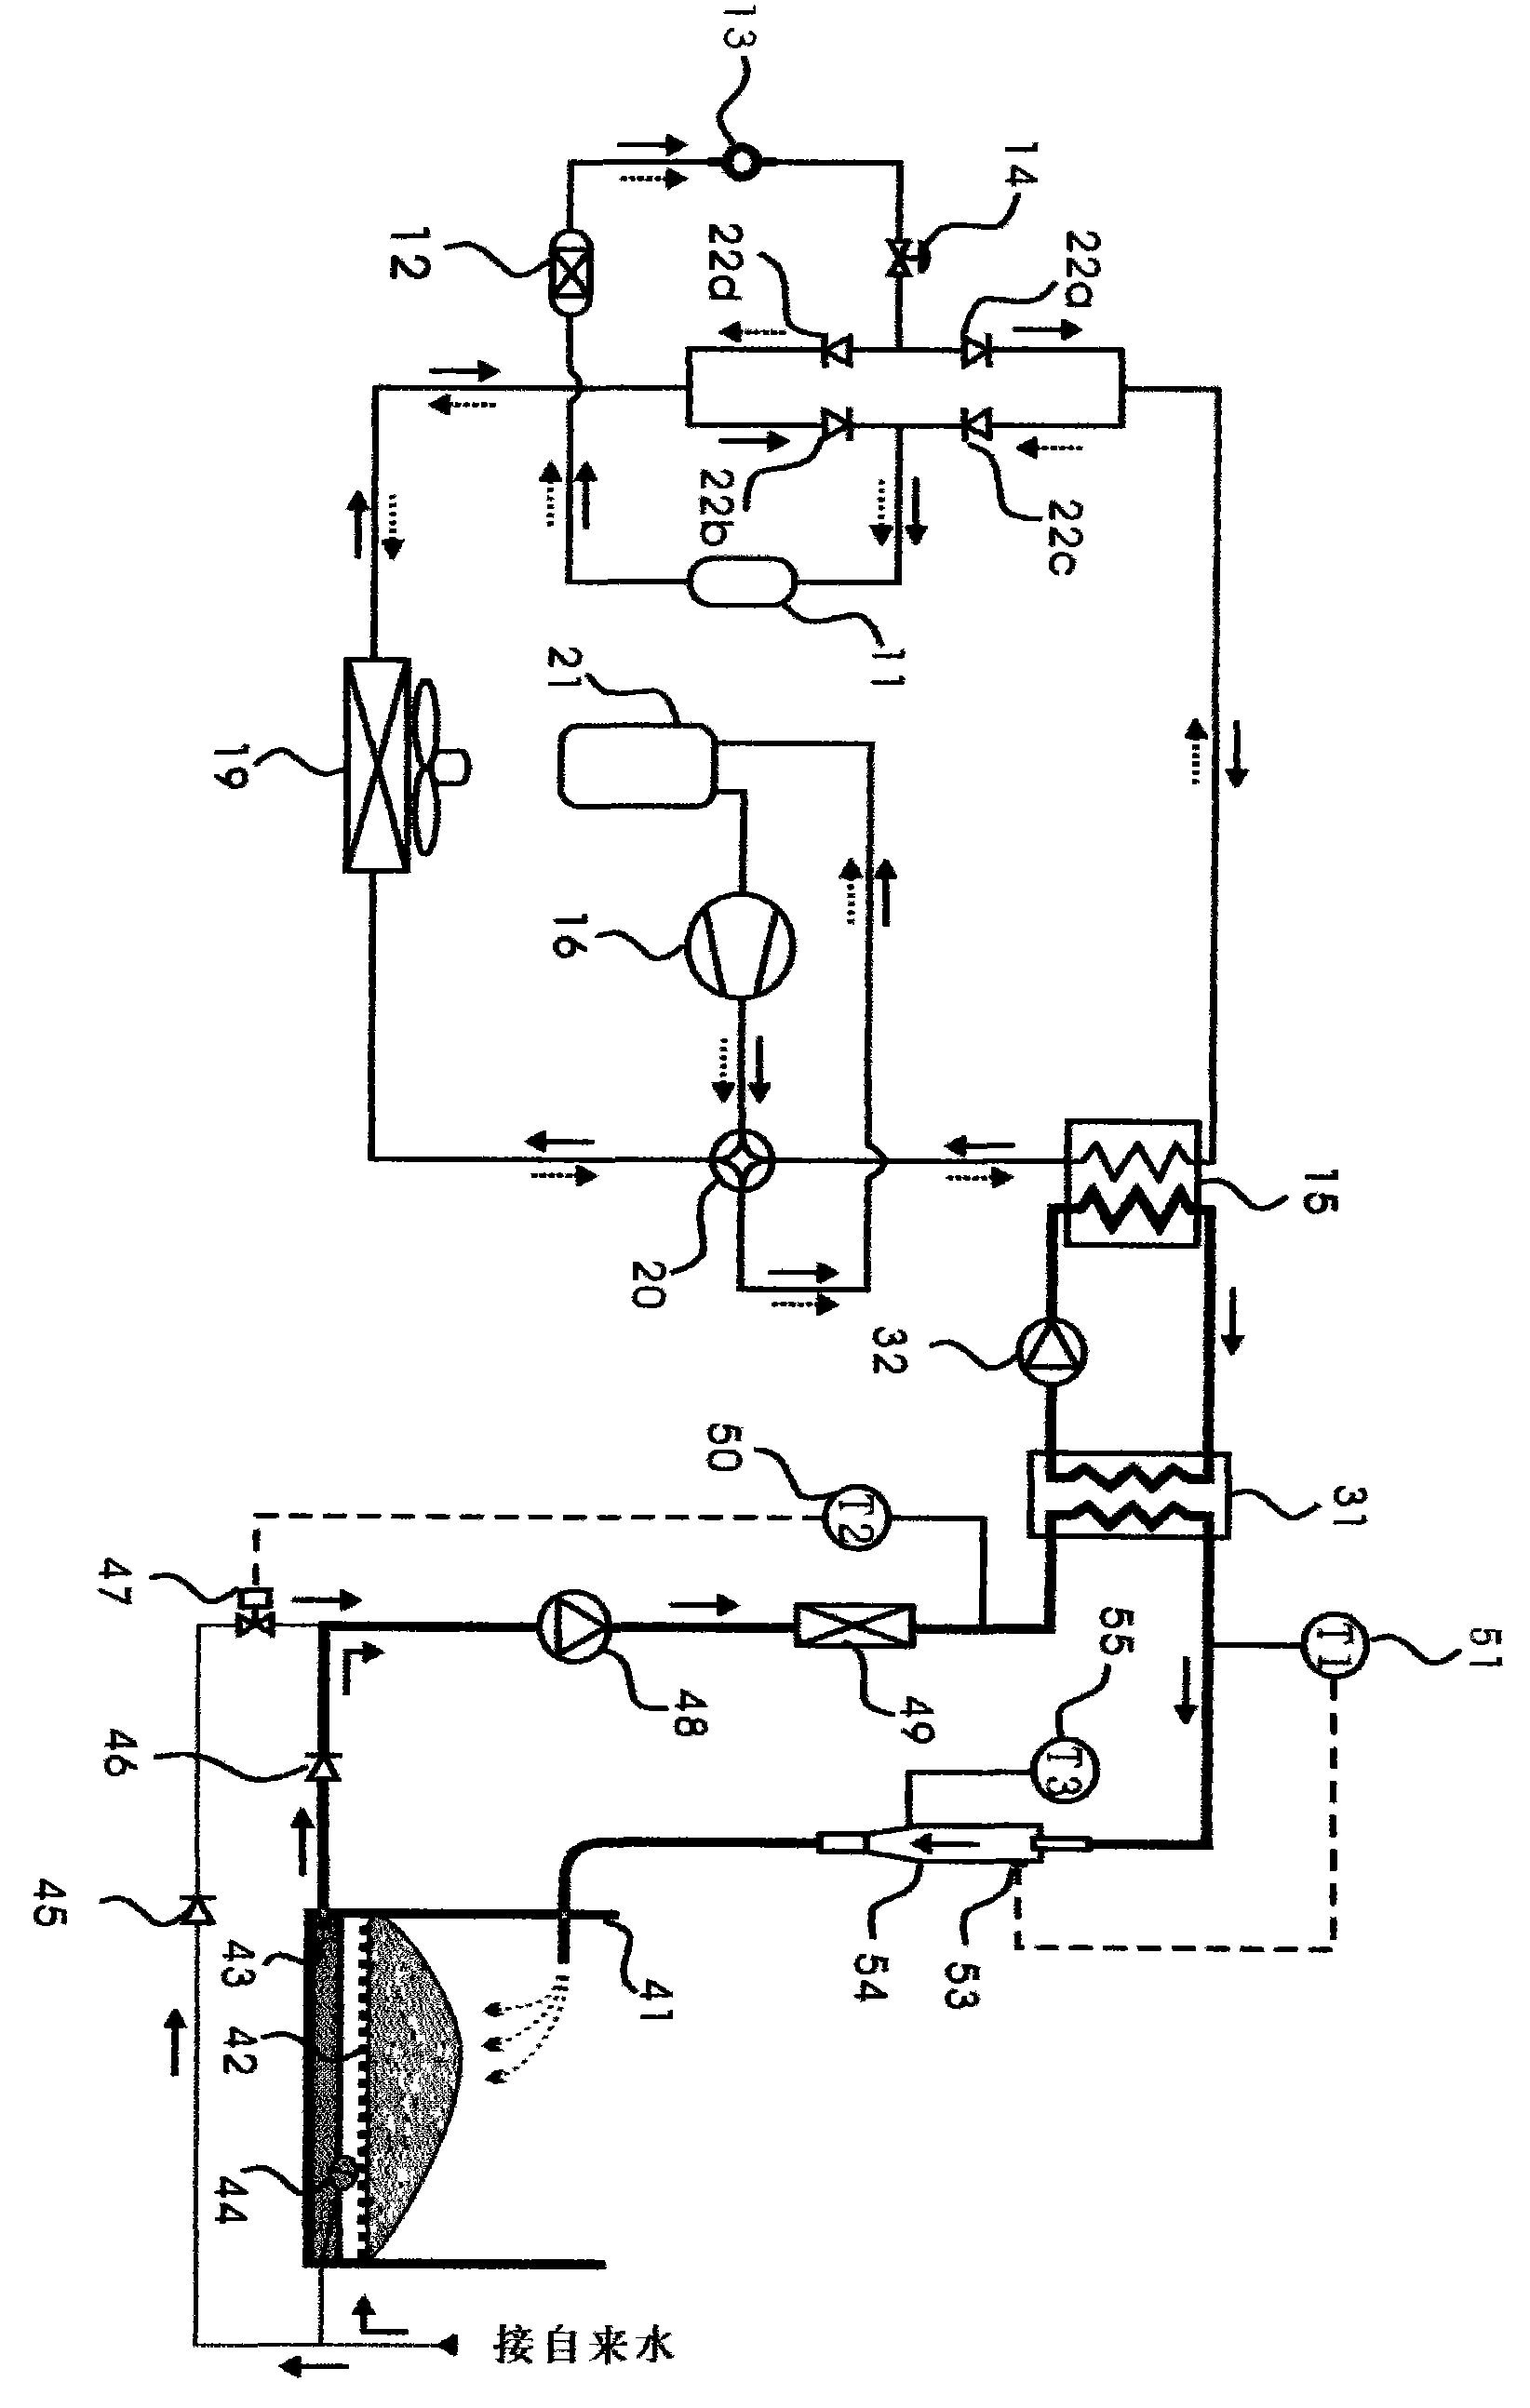 Novel method and device for producing ice